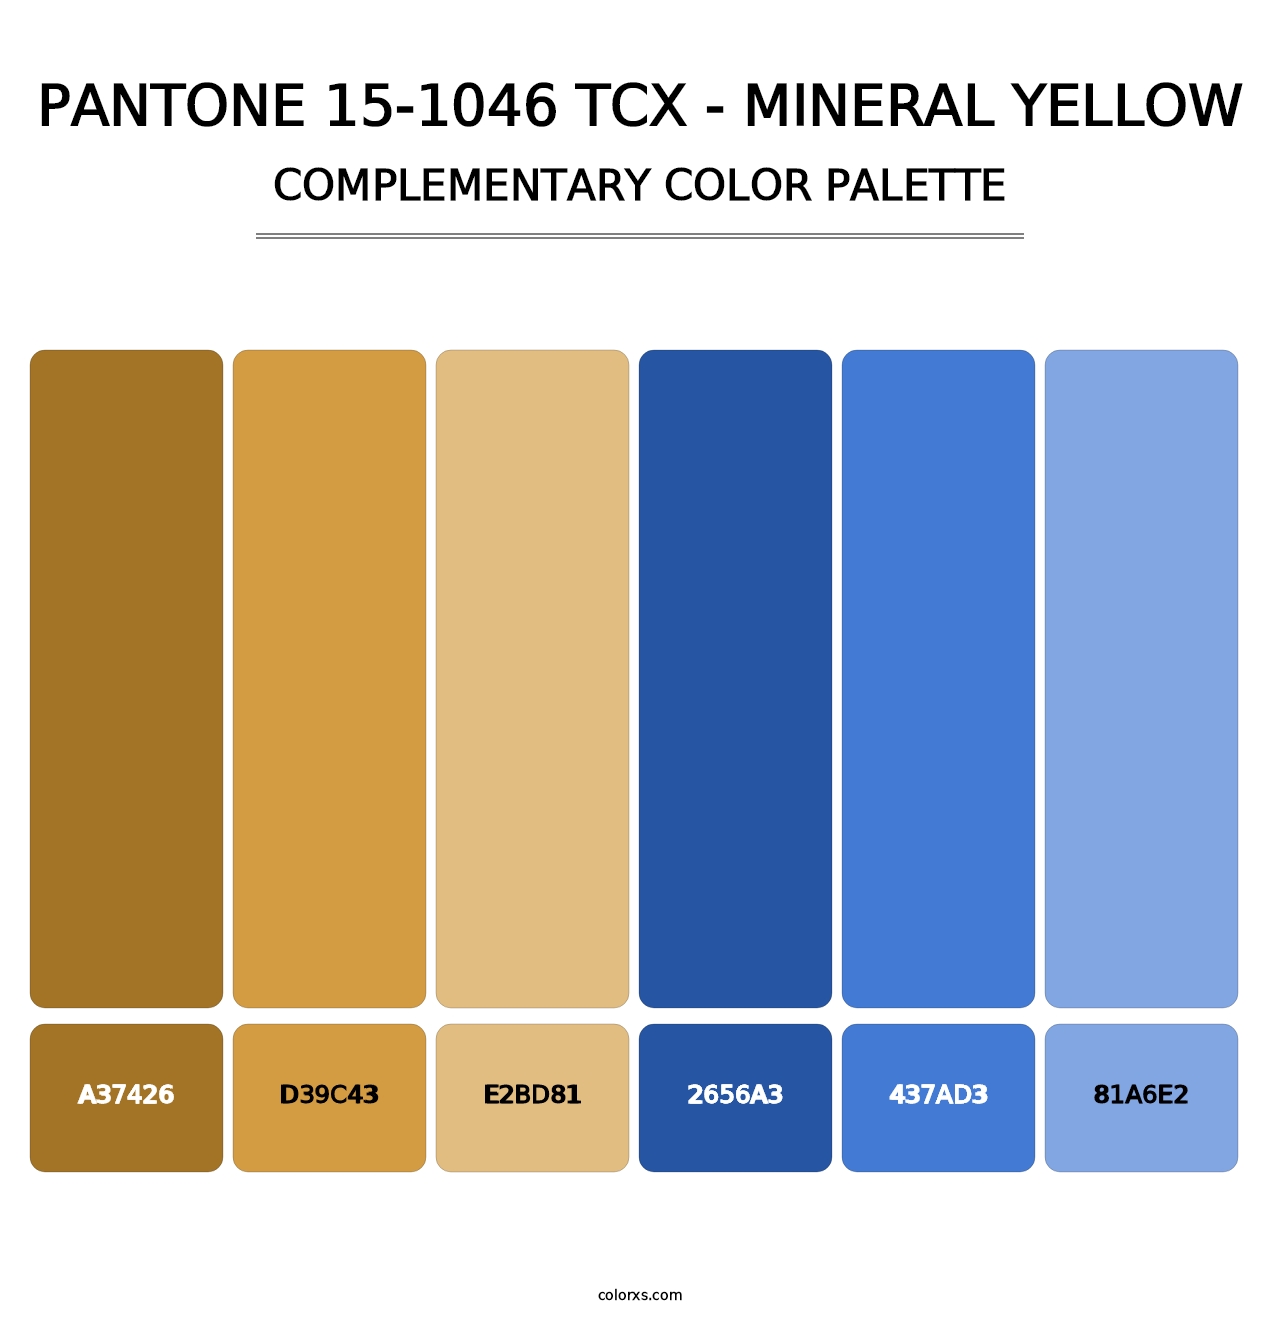 PANTONE 15-1046 TCX - Mineral Yellow - Complementary Color Palette